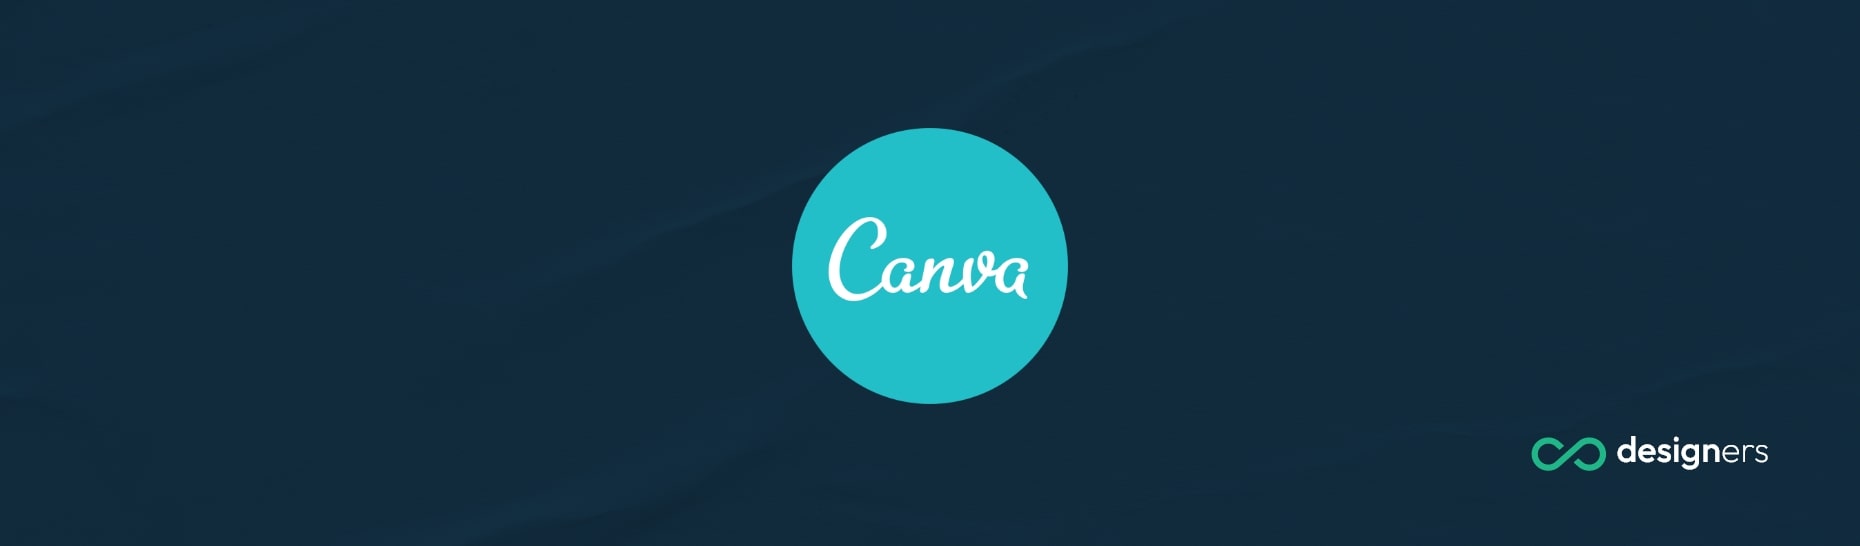 What Size Are Postcards in Canva?